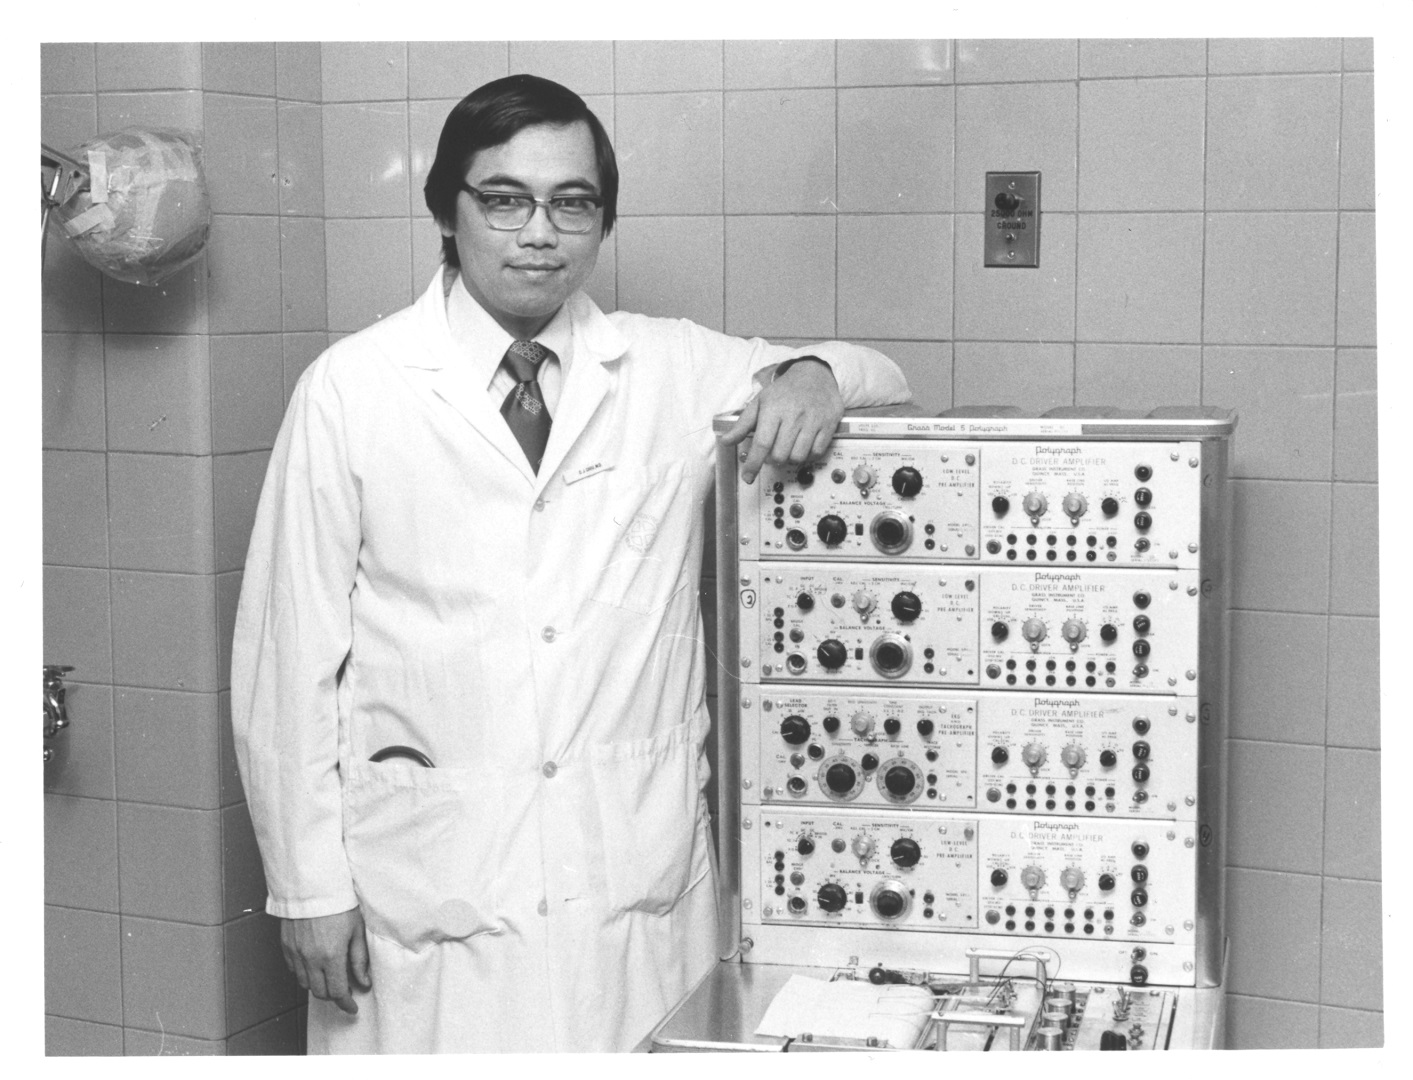 ray chiu in front of a modular computer